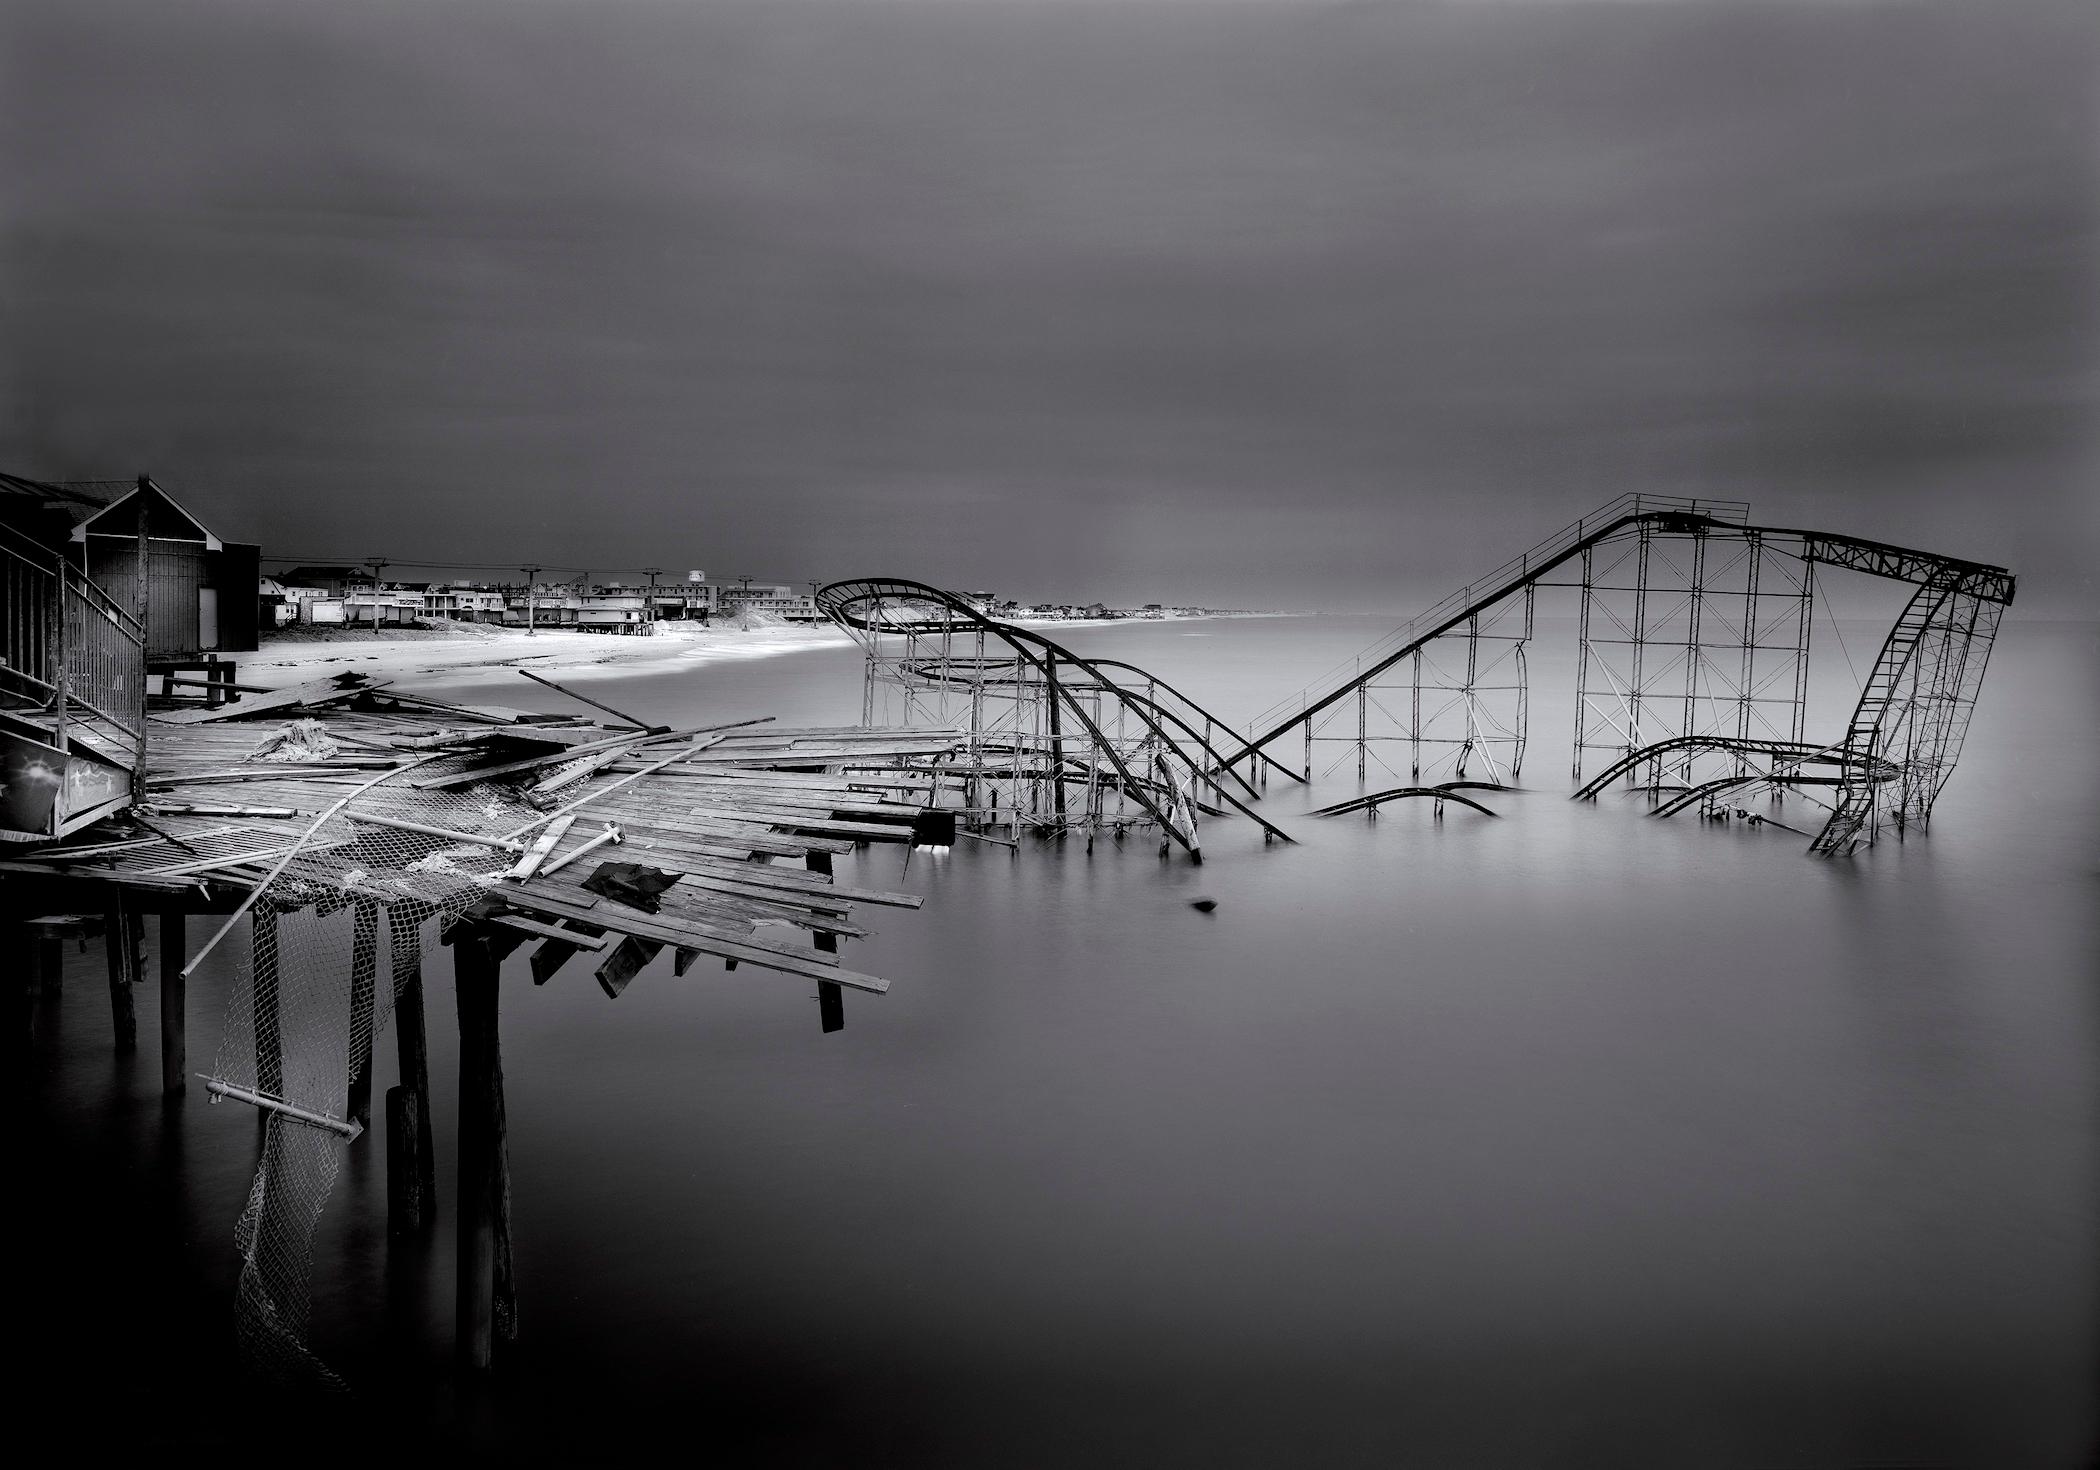 Series: Afterlife-New Jersey Shore

Print Type: Selenium, Sepia, & Iron Toned Gelatin Silver 
Printed on Bergger Prestige Fiber Based Paper
Matted & Mounted 8ply Museum Board

Available Sizes:
22" x 28" Edition of 3 + 1 AP
32" x 40"	Edition of 10 +